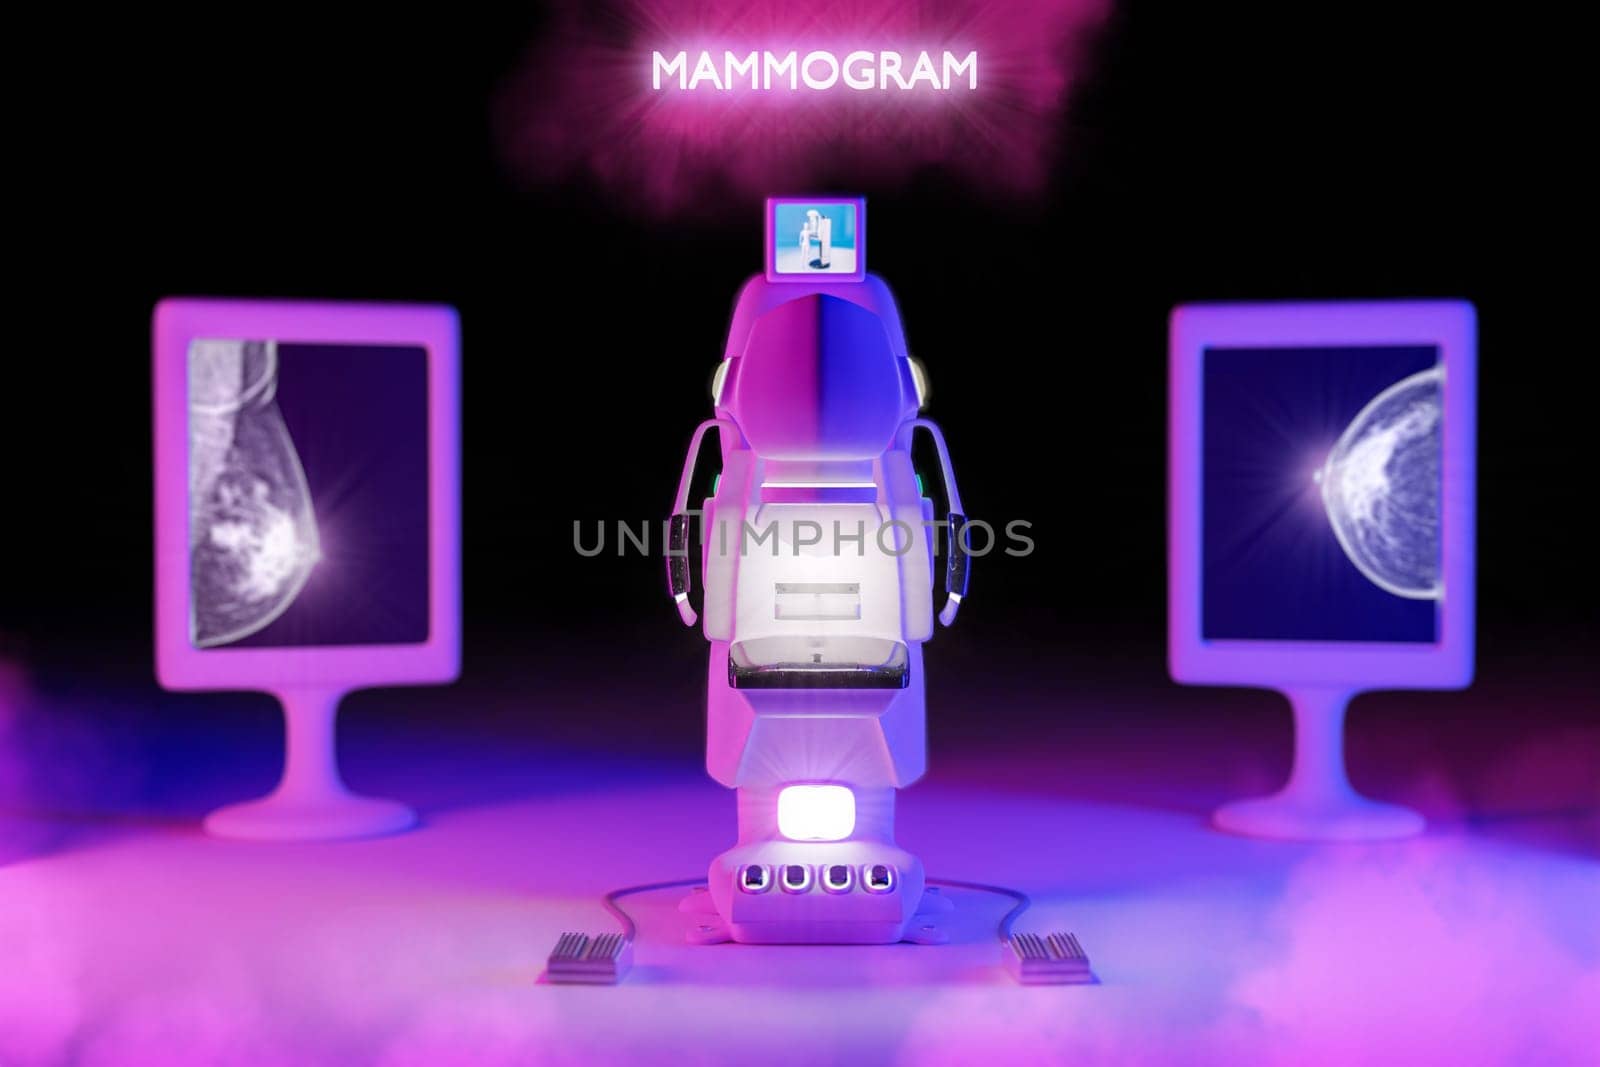 Mammogram device  for screening breast cancer in hospital on pink background. 3D rendering.